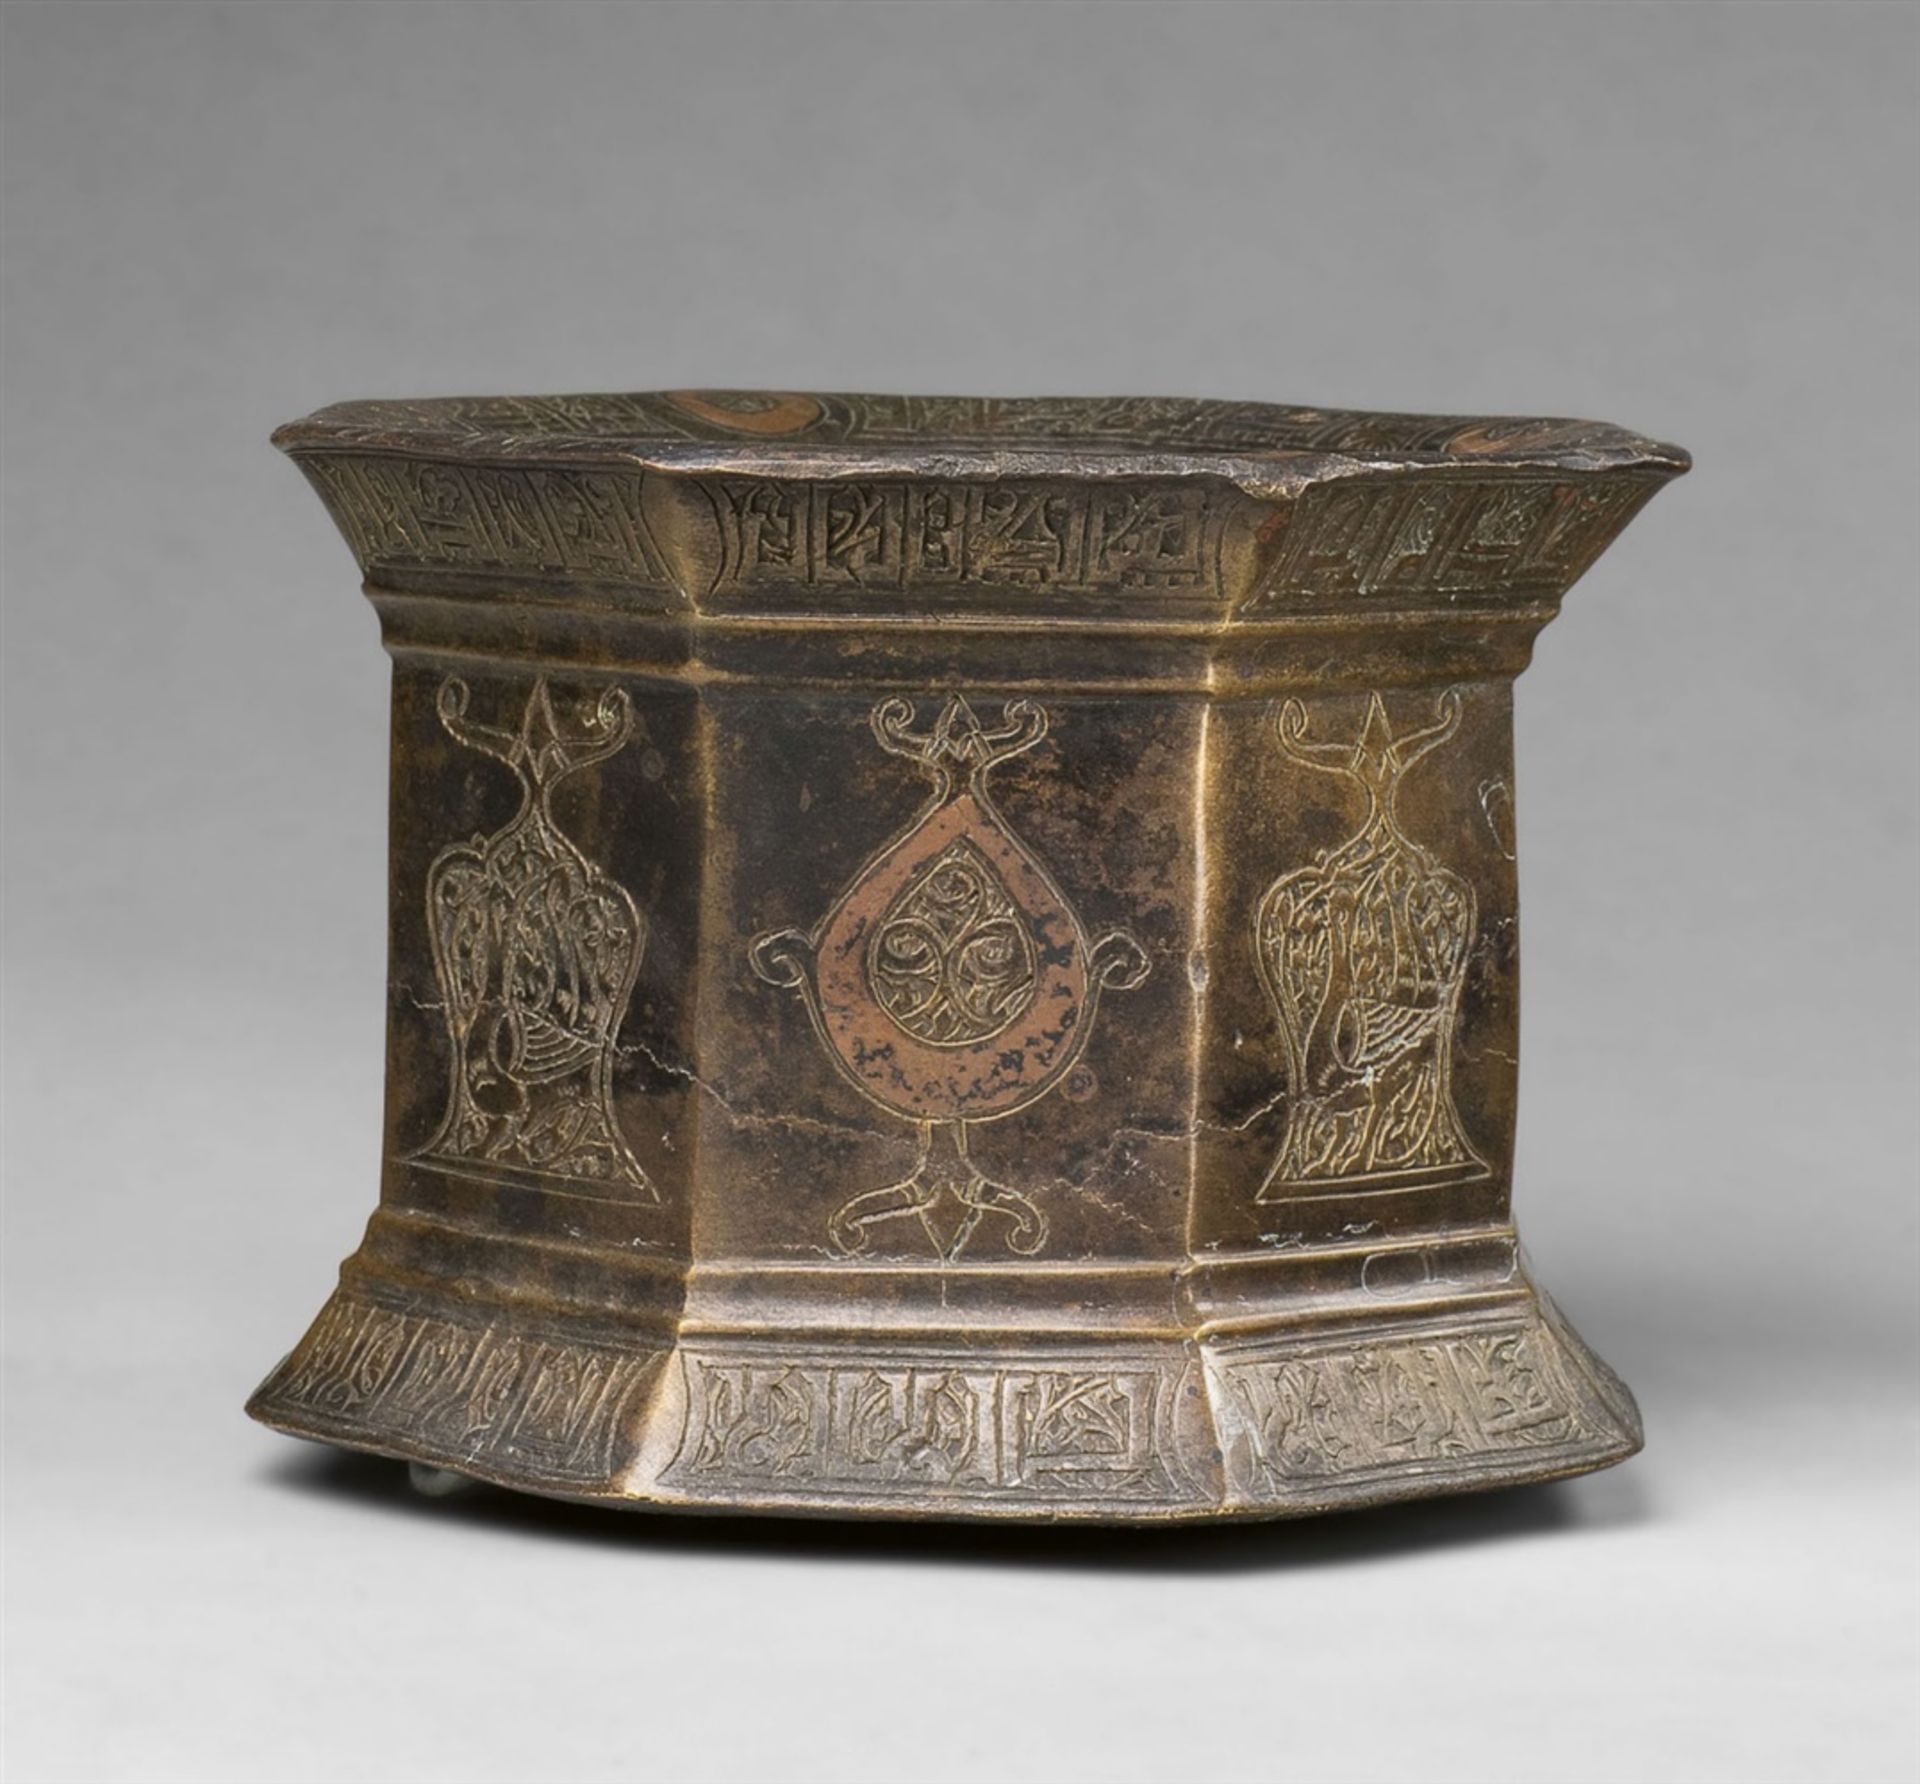 An important mortar with bird engravingsChased cast bronze with copper damascening. Of octagonal